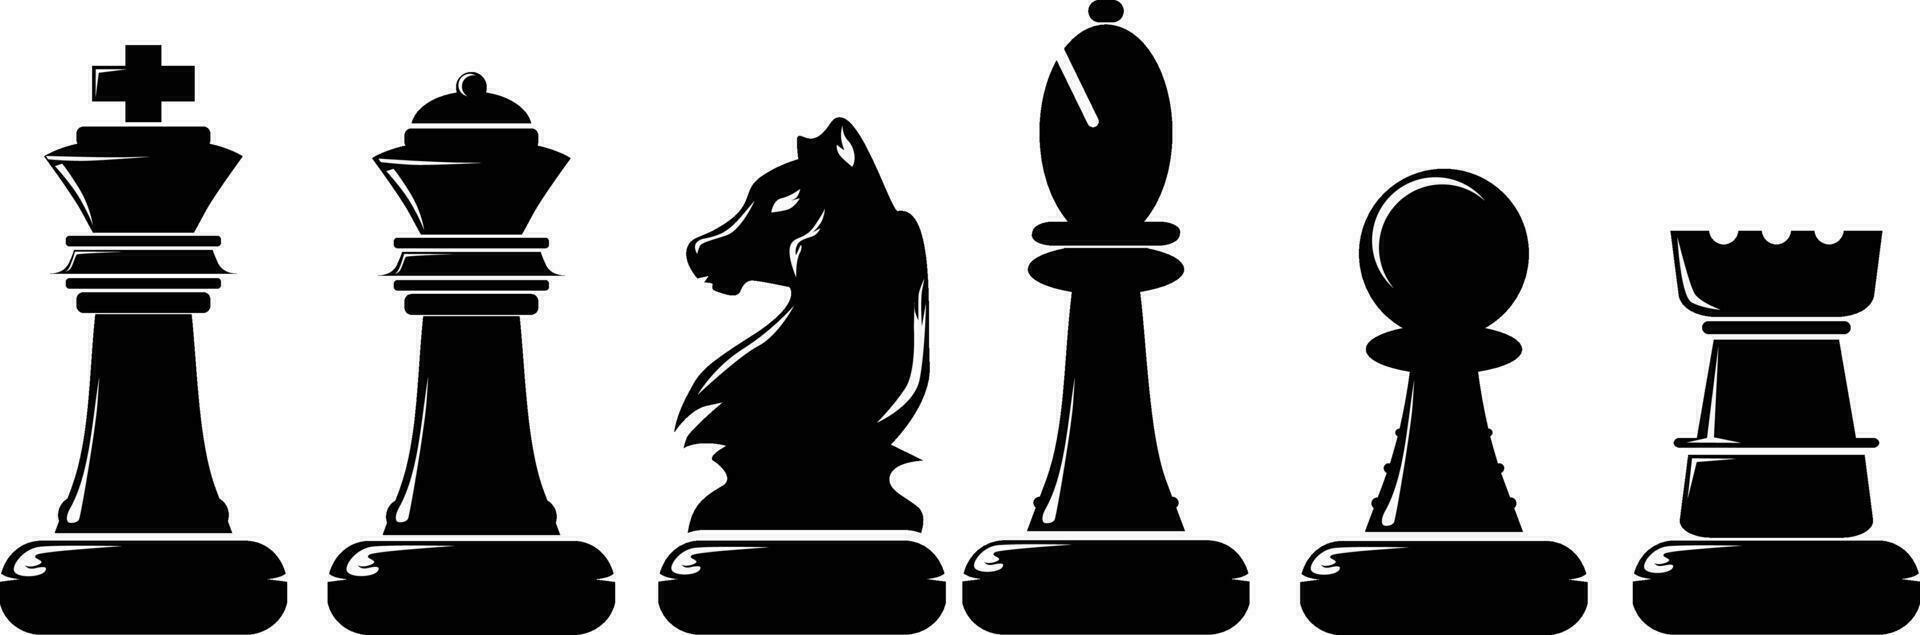 Chess piece icons Vector illustration